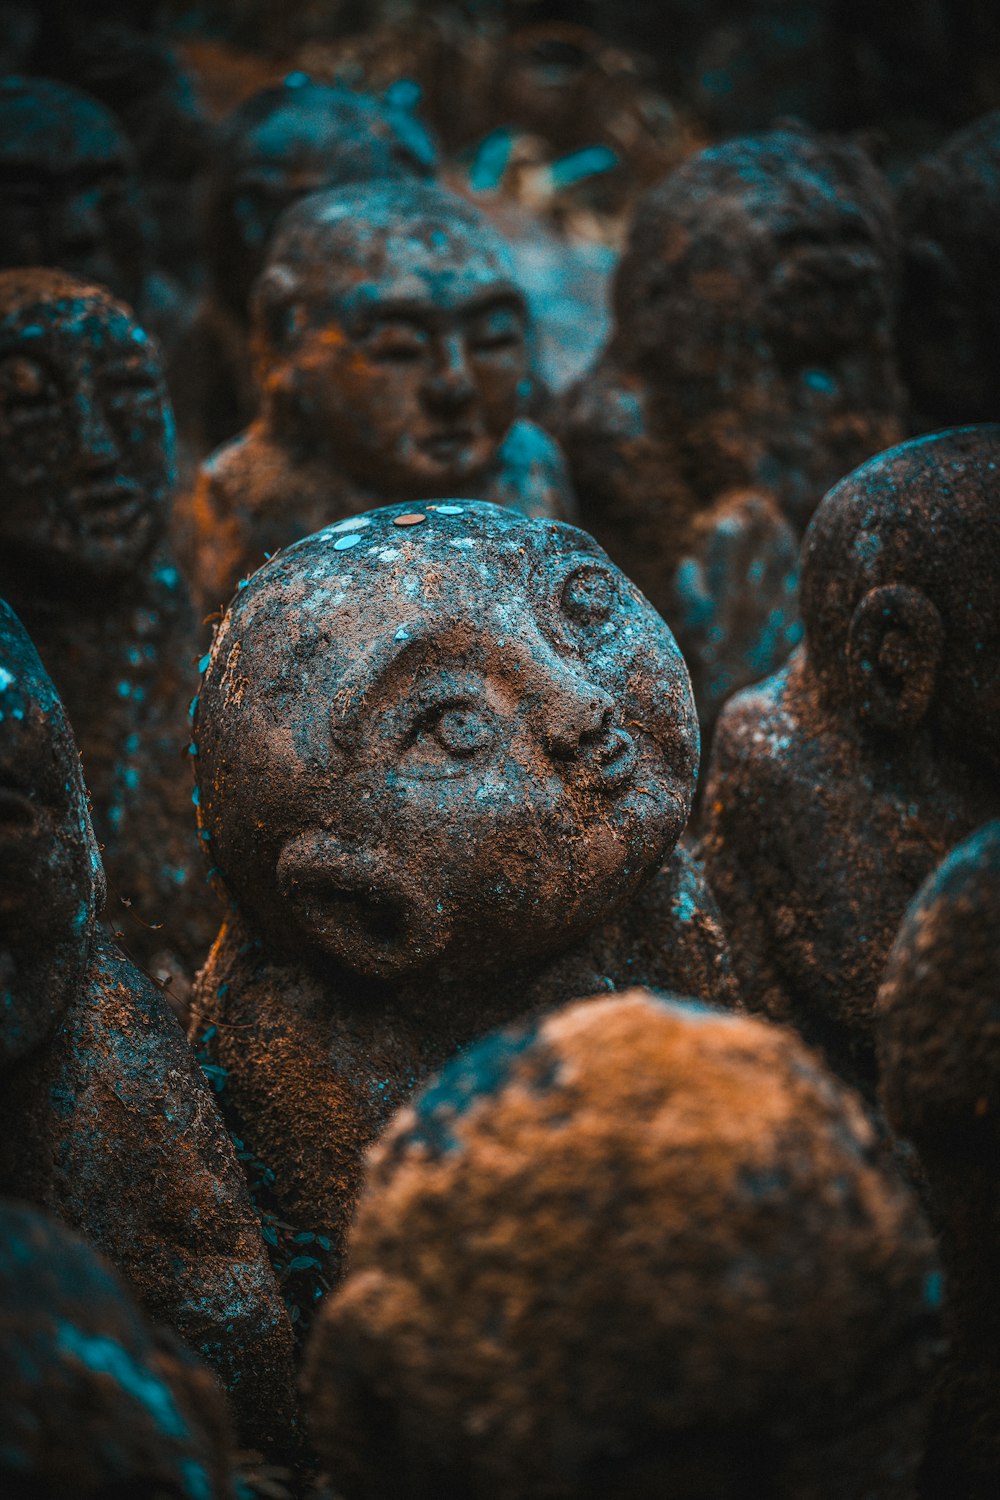 a close up of a group of statues